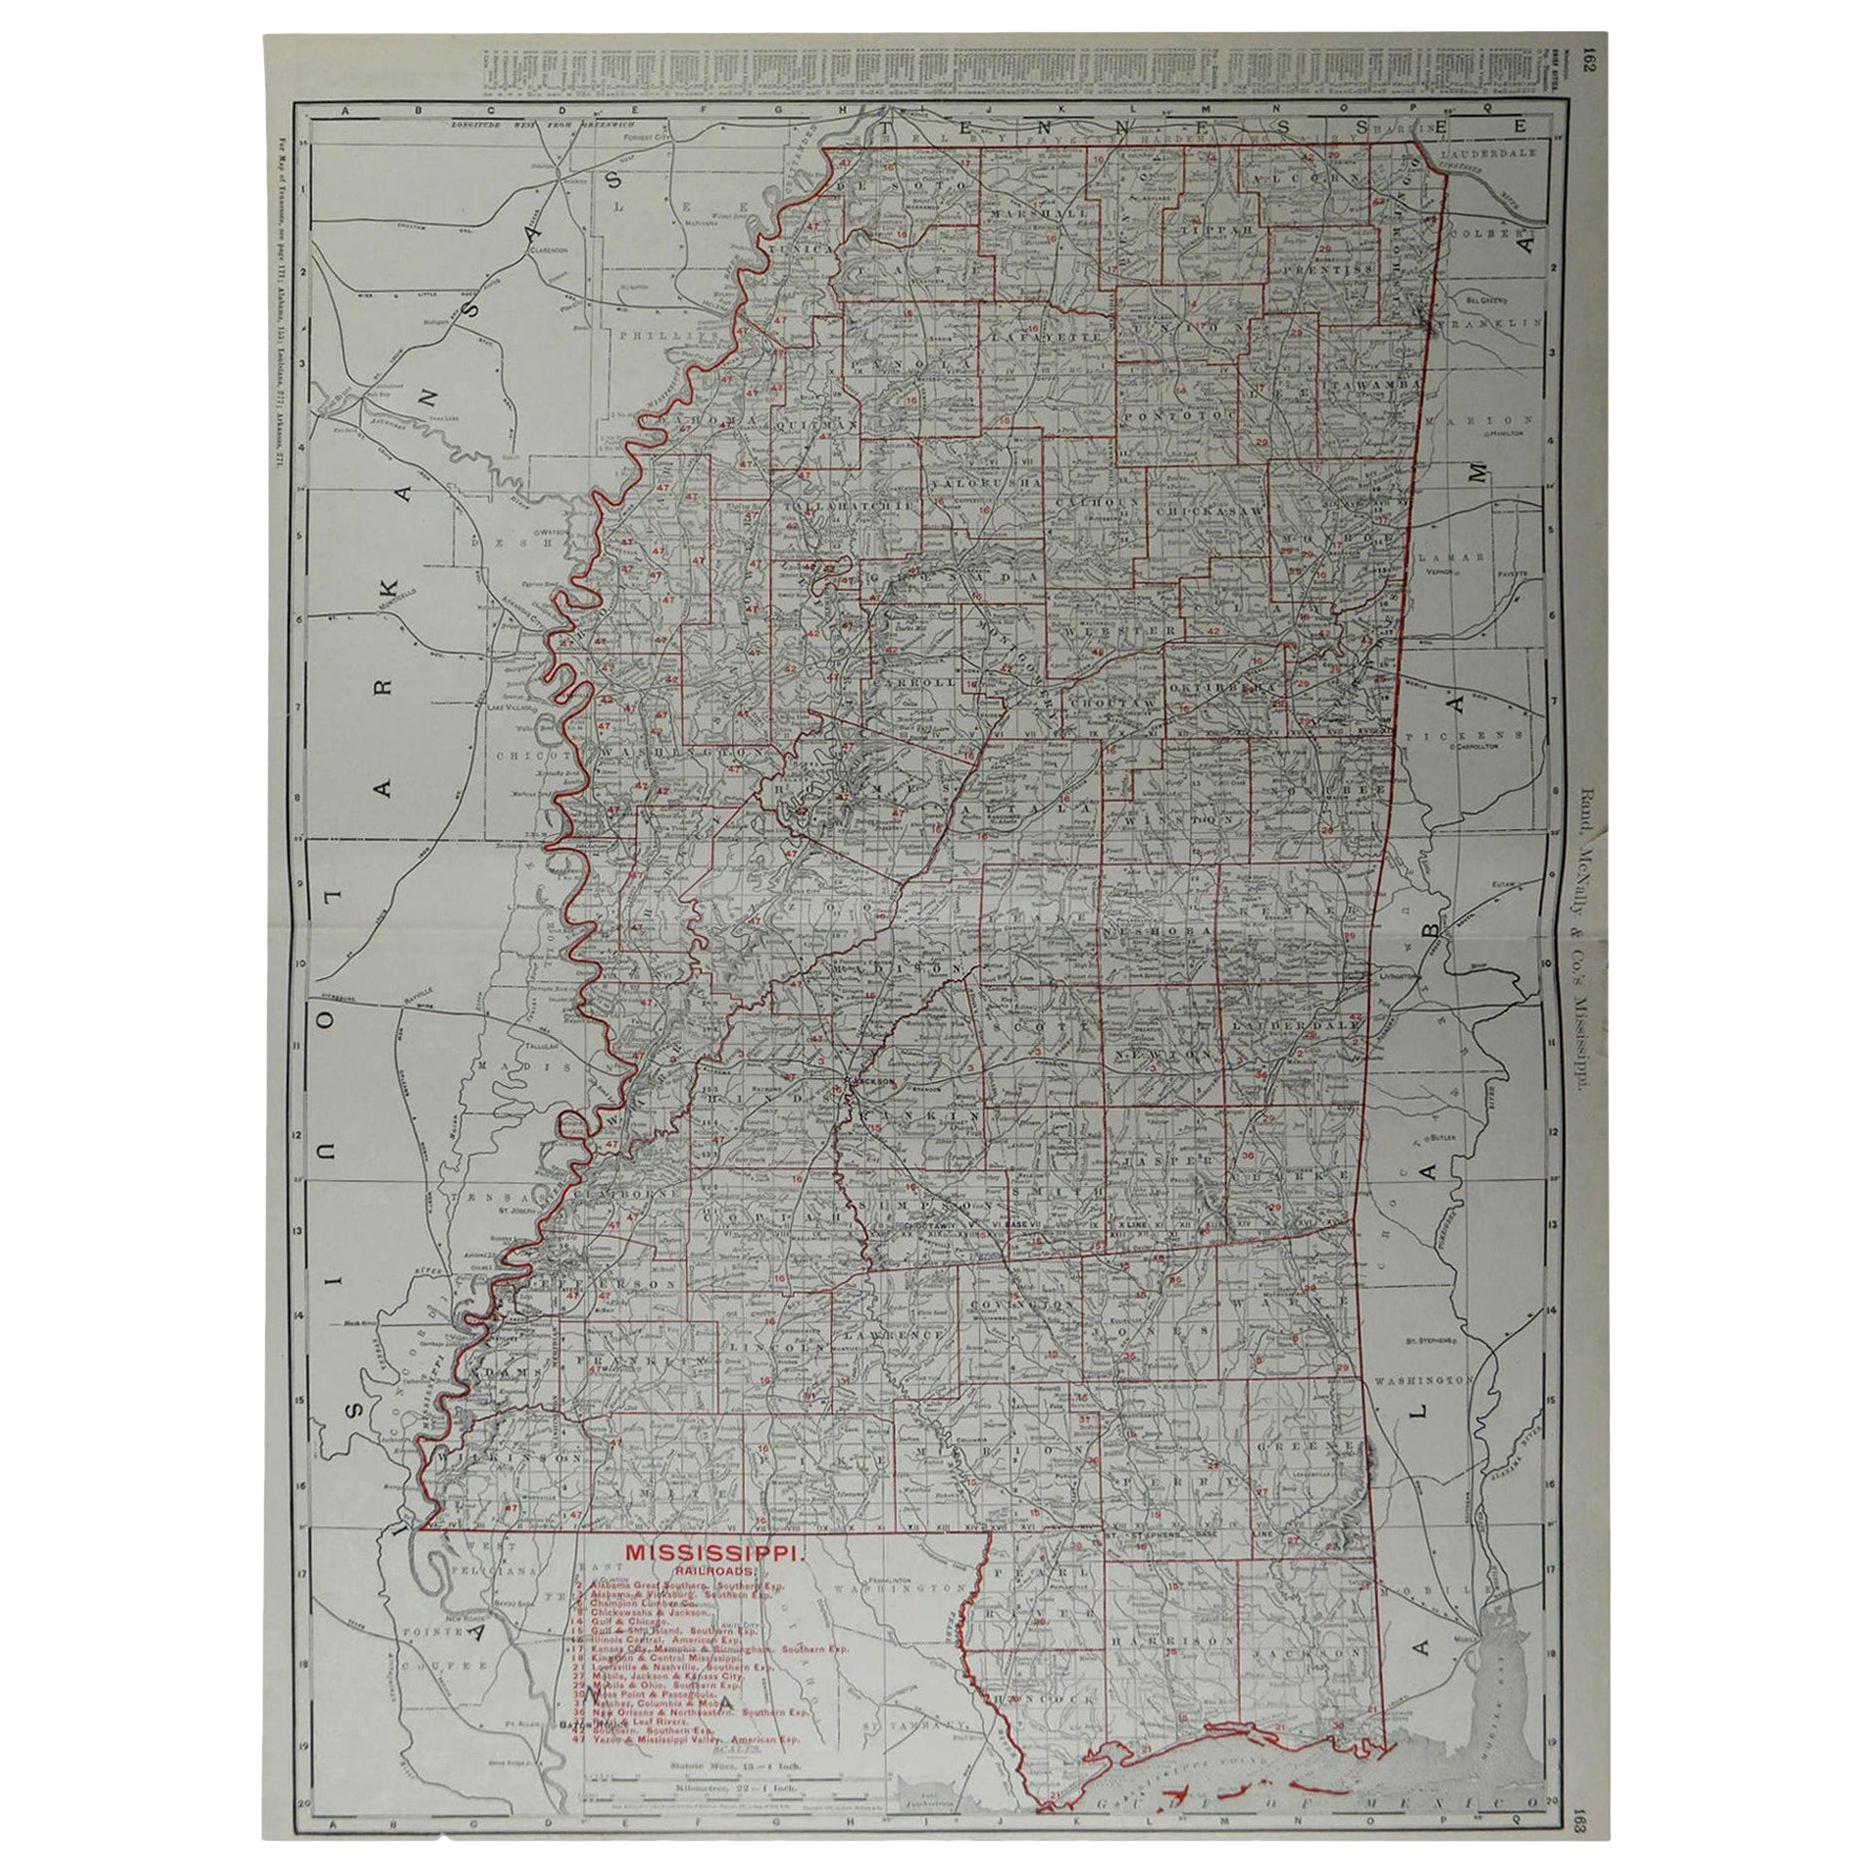 Large Original Antique Map of Mississippi by Rand McNally, circa 1900